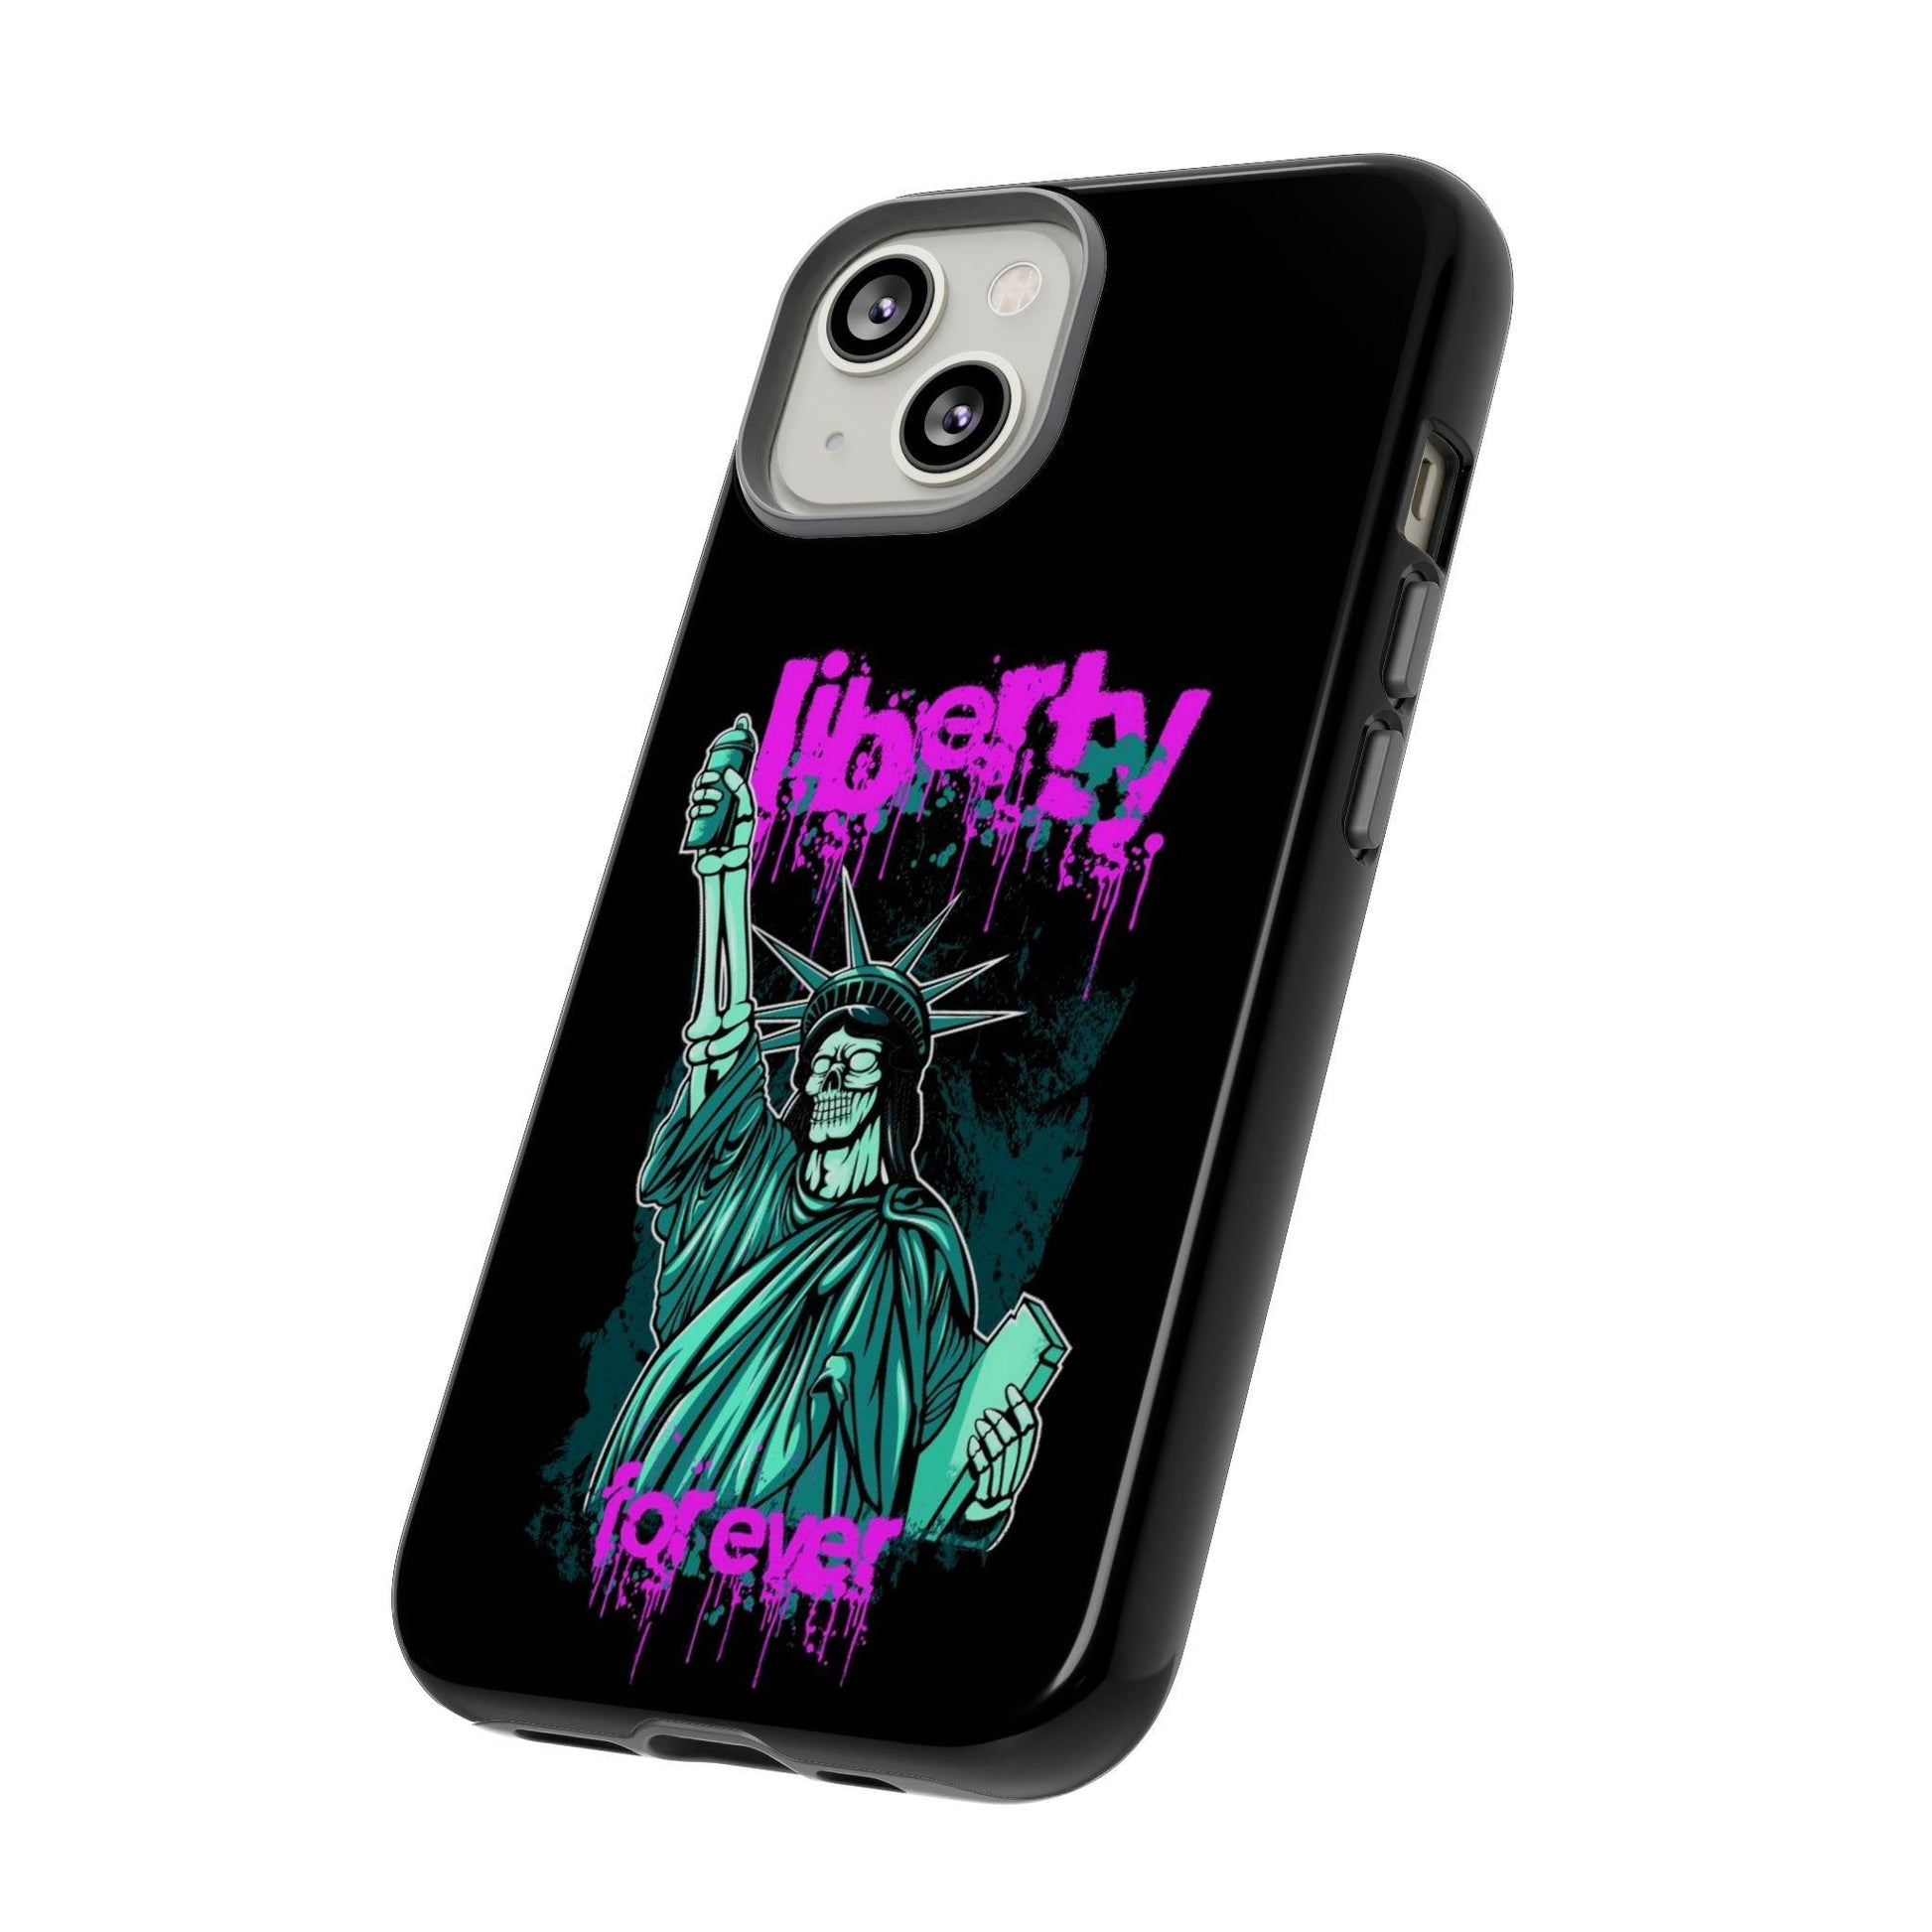 Apple Iphone Rotten Liberty Cover -- Apple Iphone Rotten Liberty Cover - undefined Phone Case | JLR Design